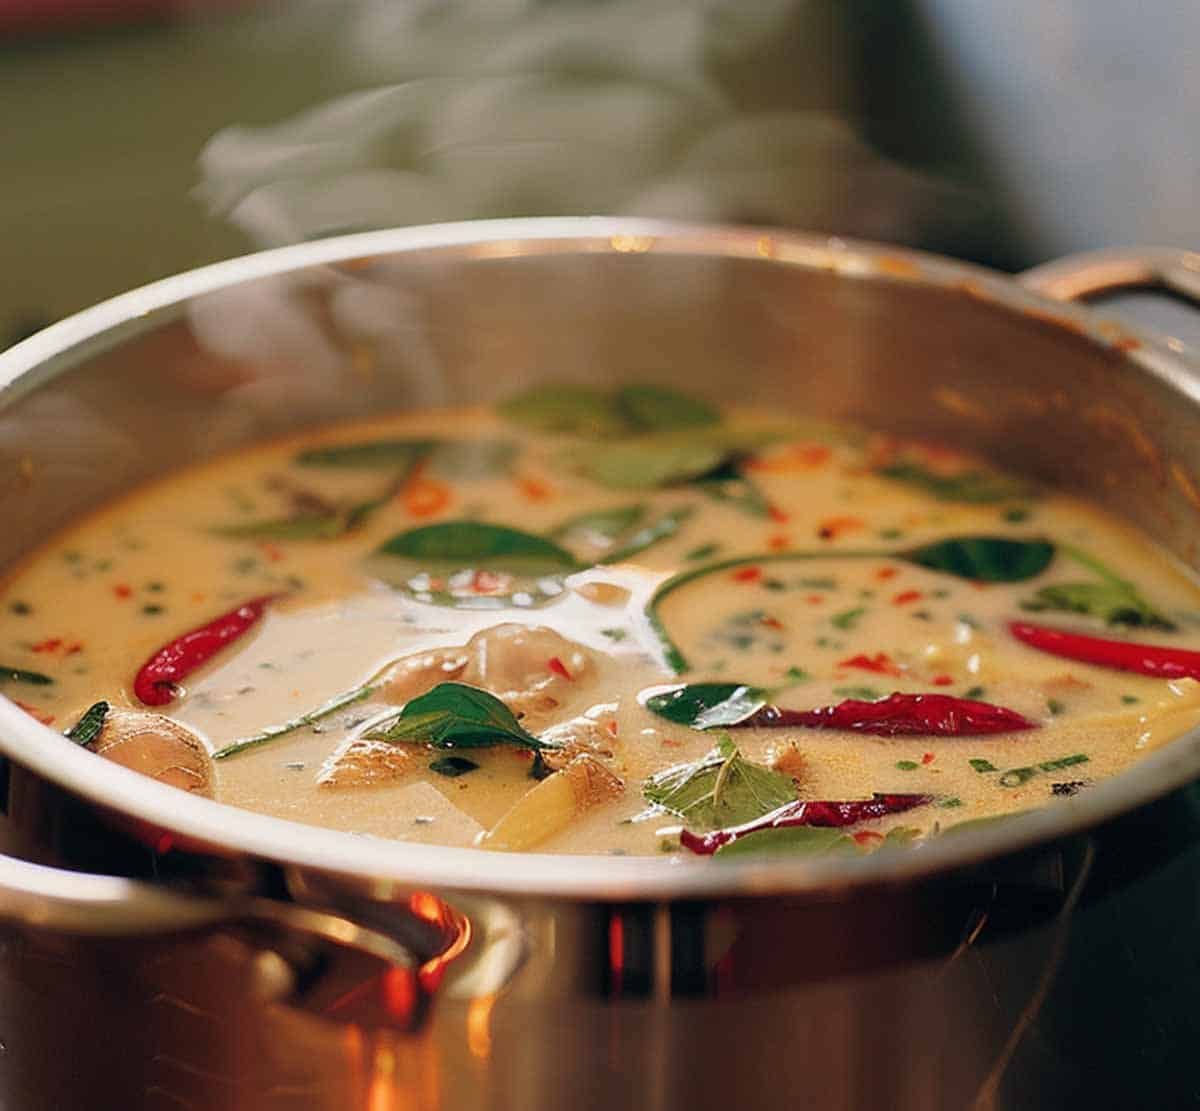 Cooking a pot of Thai Coconut Chicken Soup (Tom Kha Gai) with simmering coconut milk, chicken, mushrooms, and fresh herbs